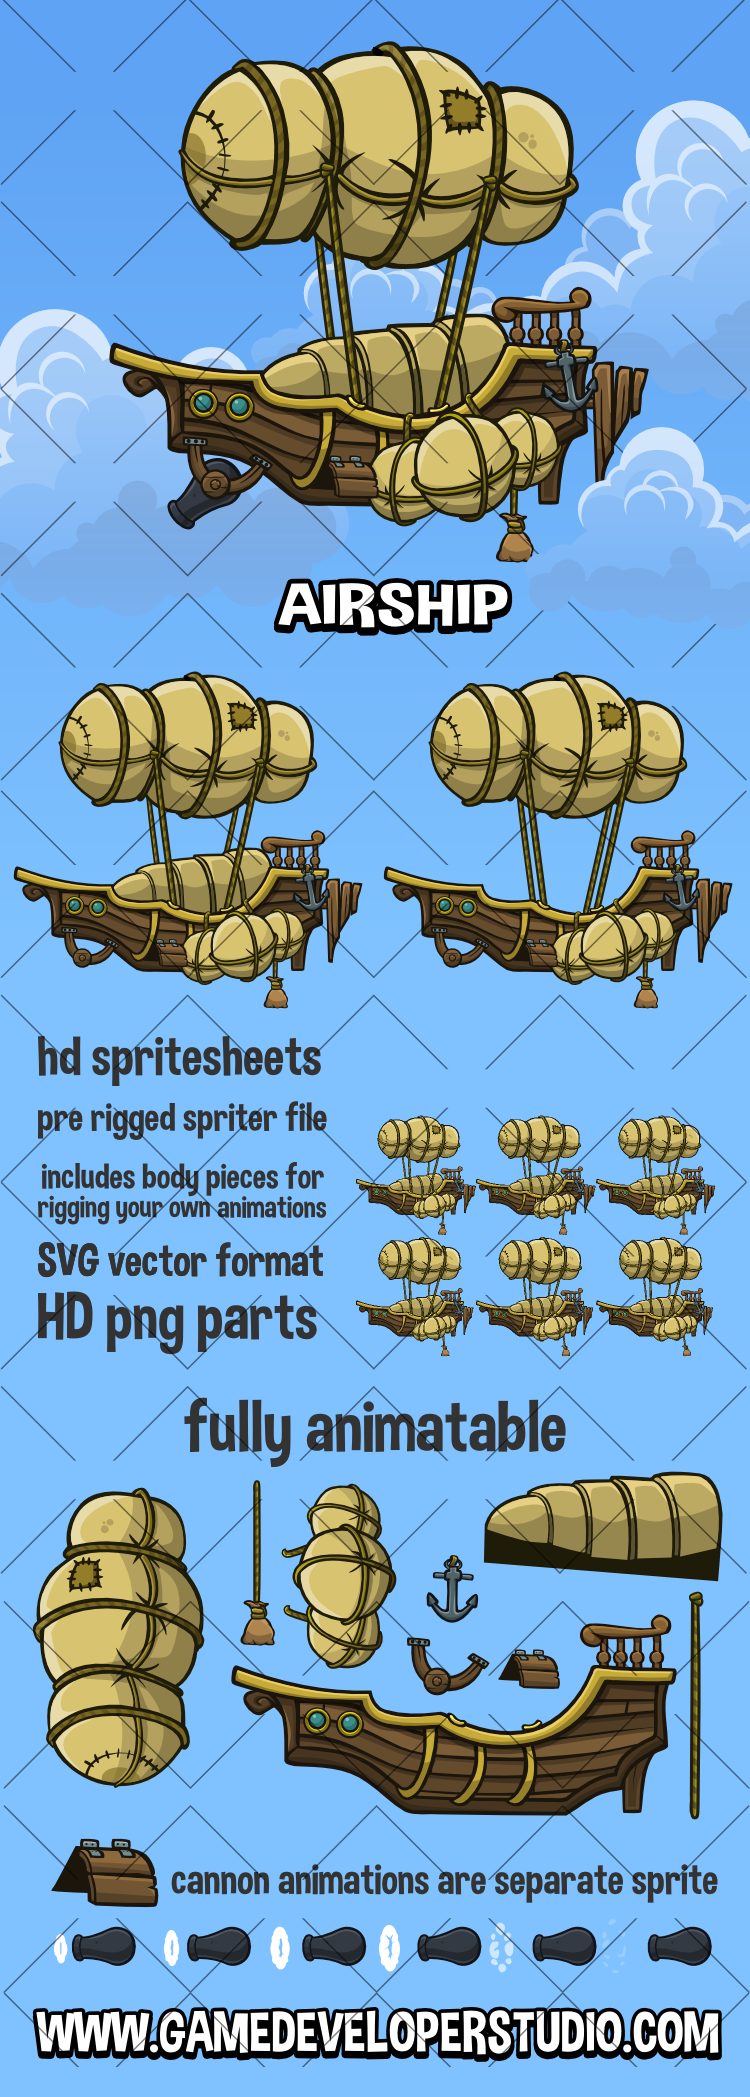 Animated airship 2d game asset